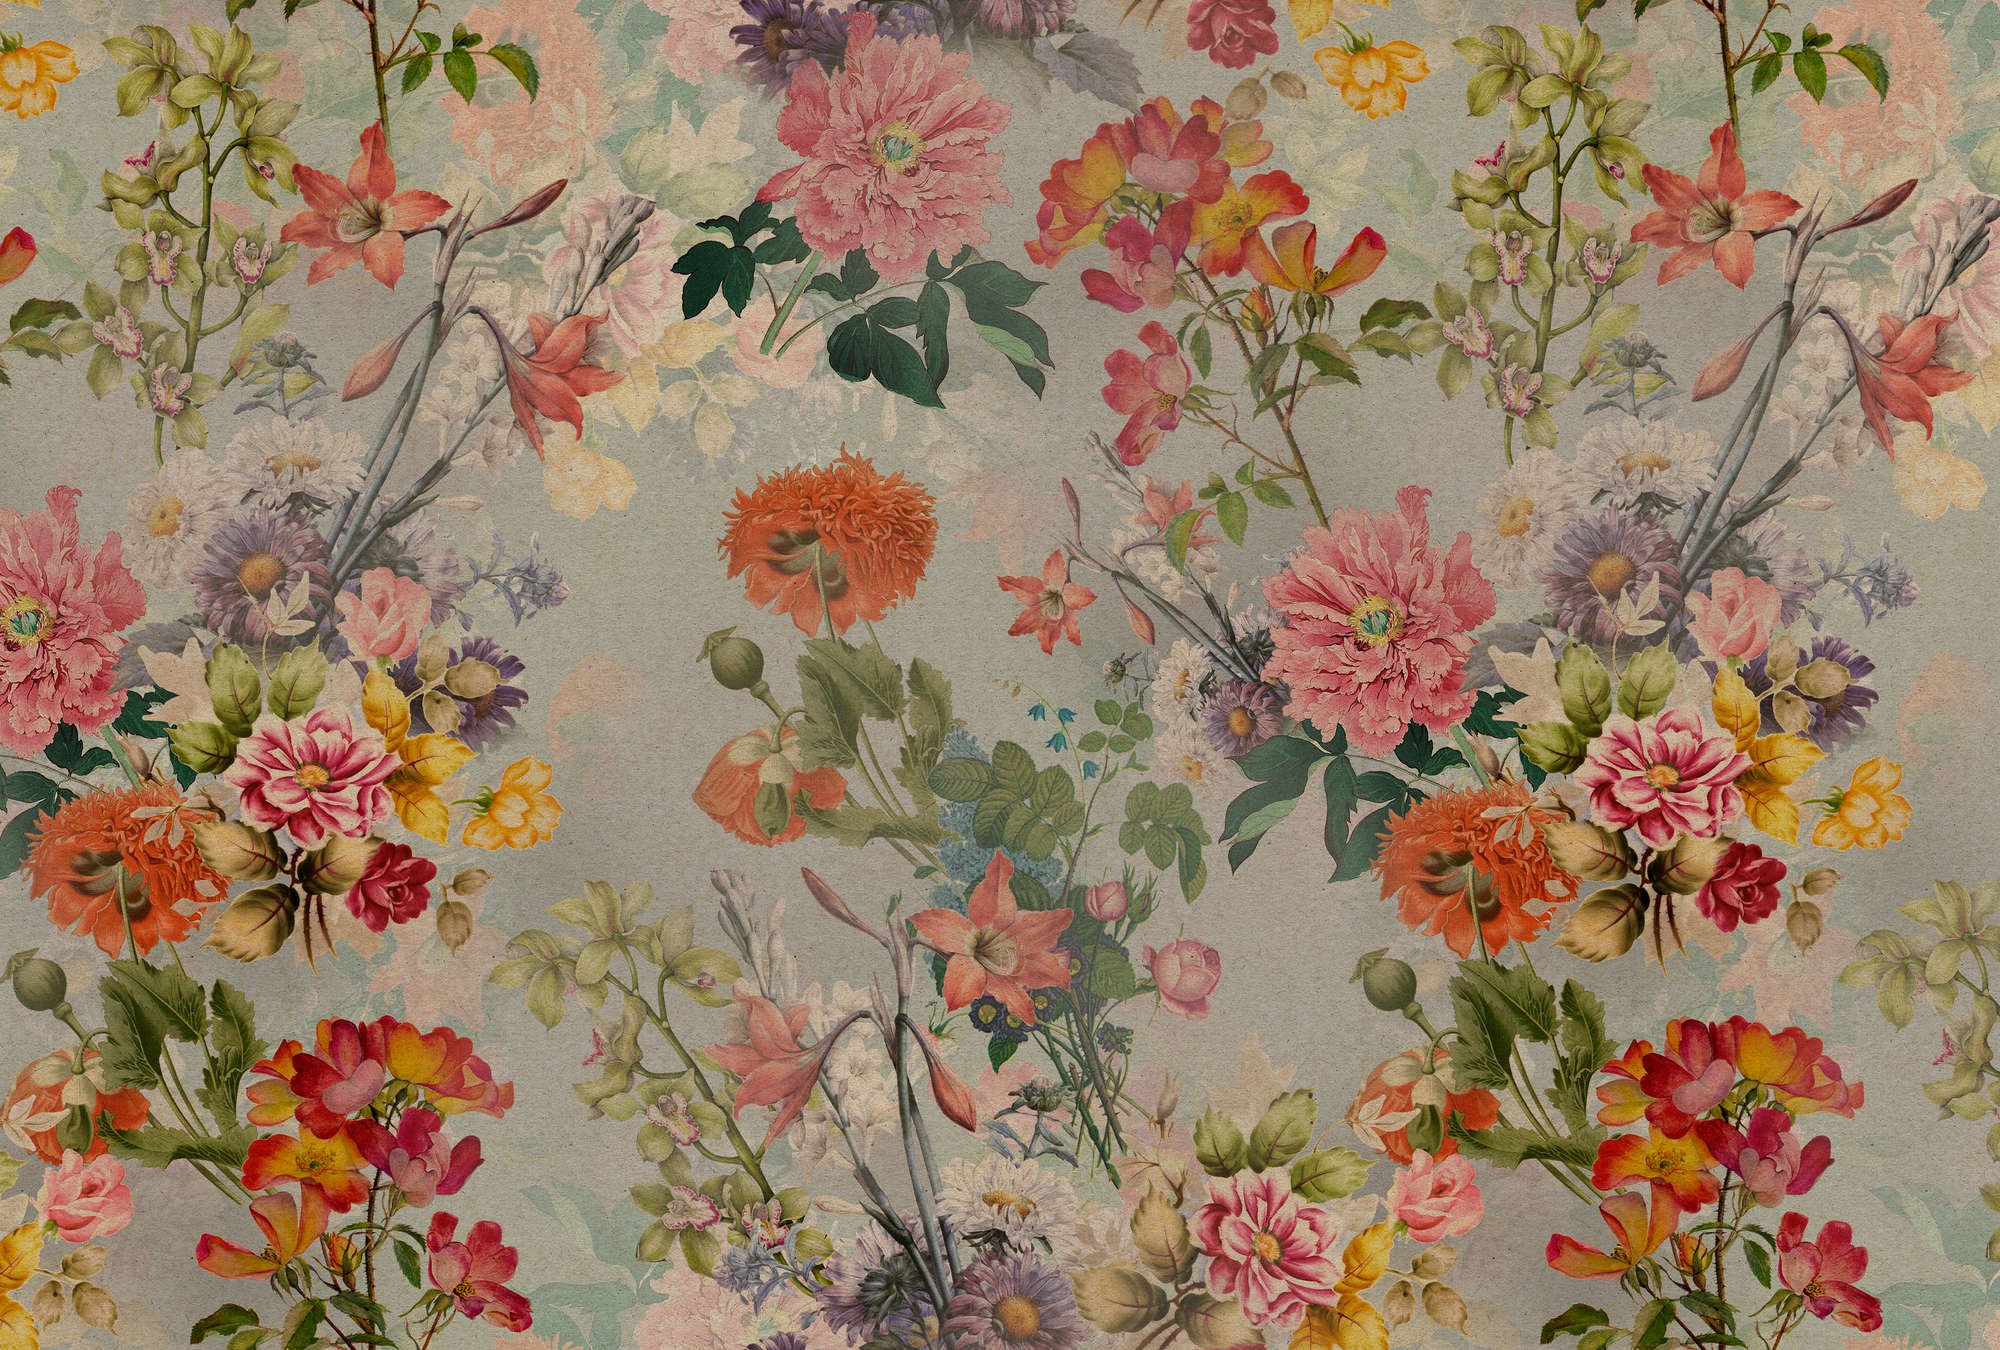             Amelies Home 1 - Vintage flowers mural in romantic country style
        